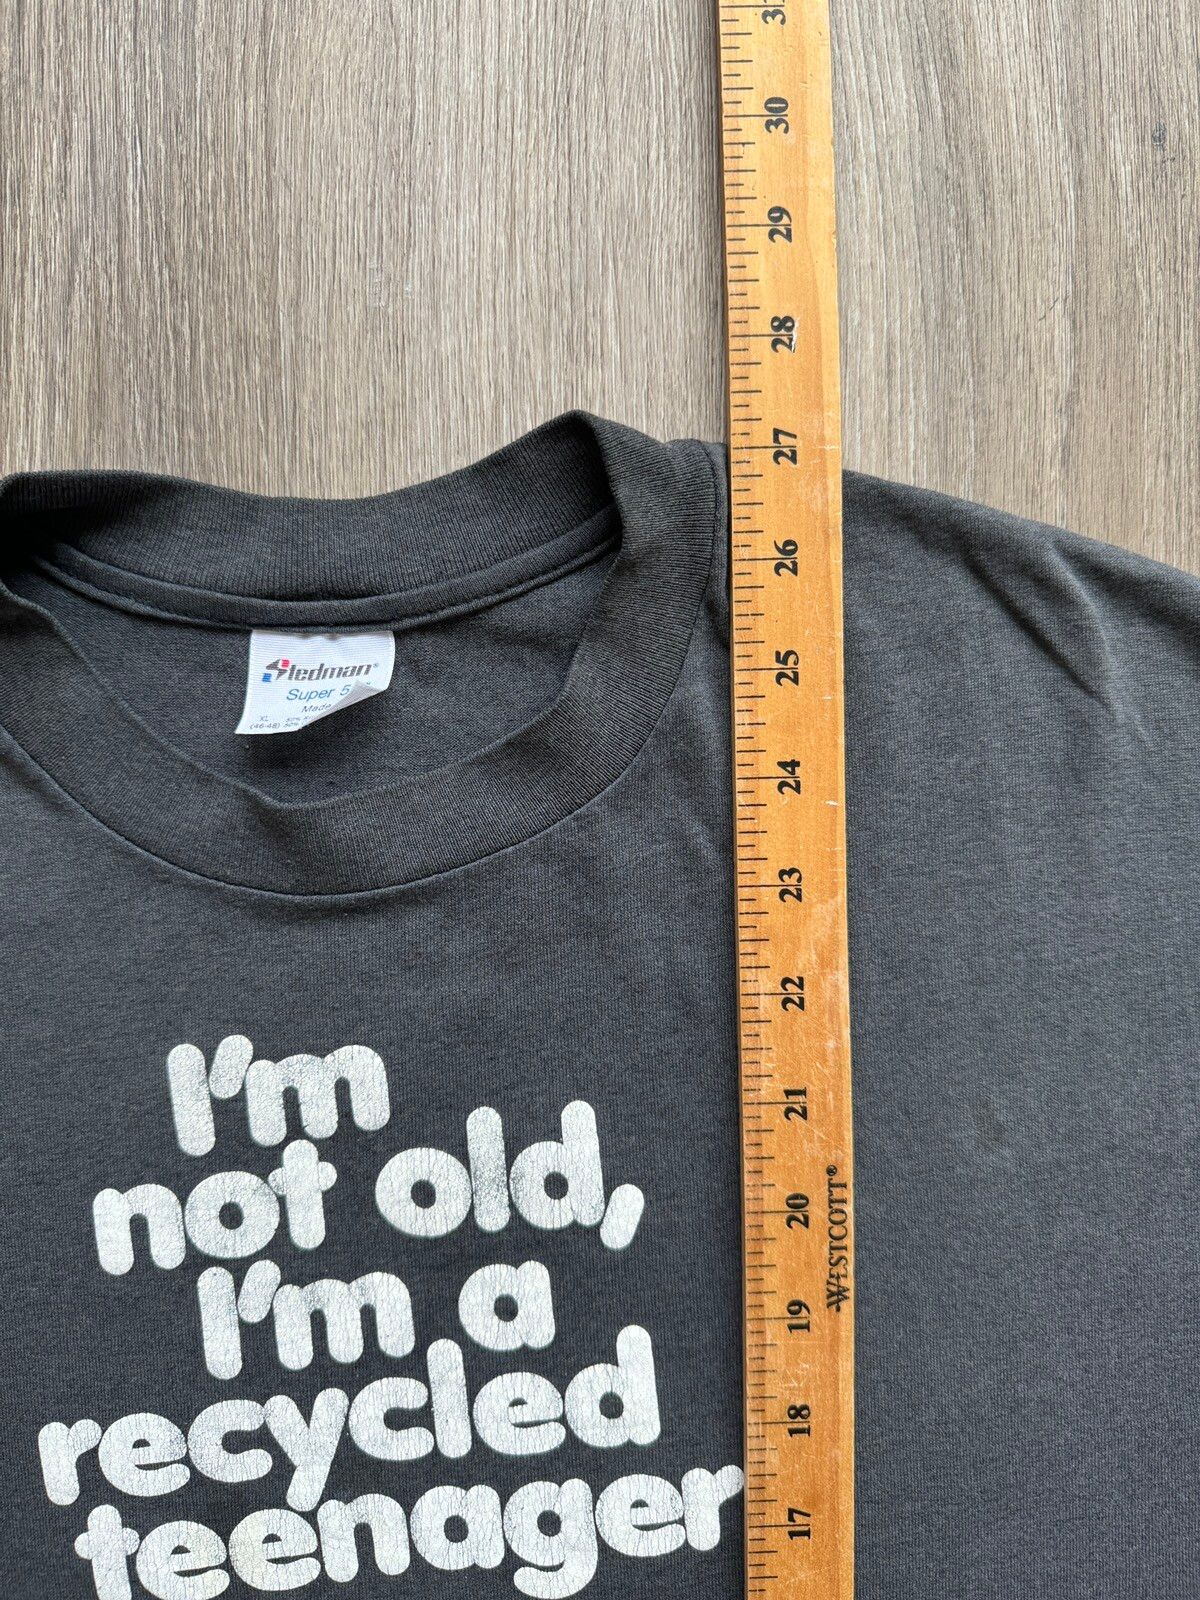 Vintage Vintage 90s I’m not old, I’m a Recycled Teenager! Statement Size US XL / EU 56 / 4 - 13 Preview